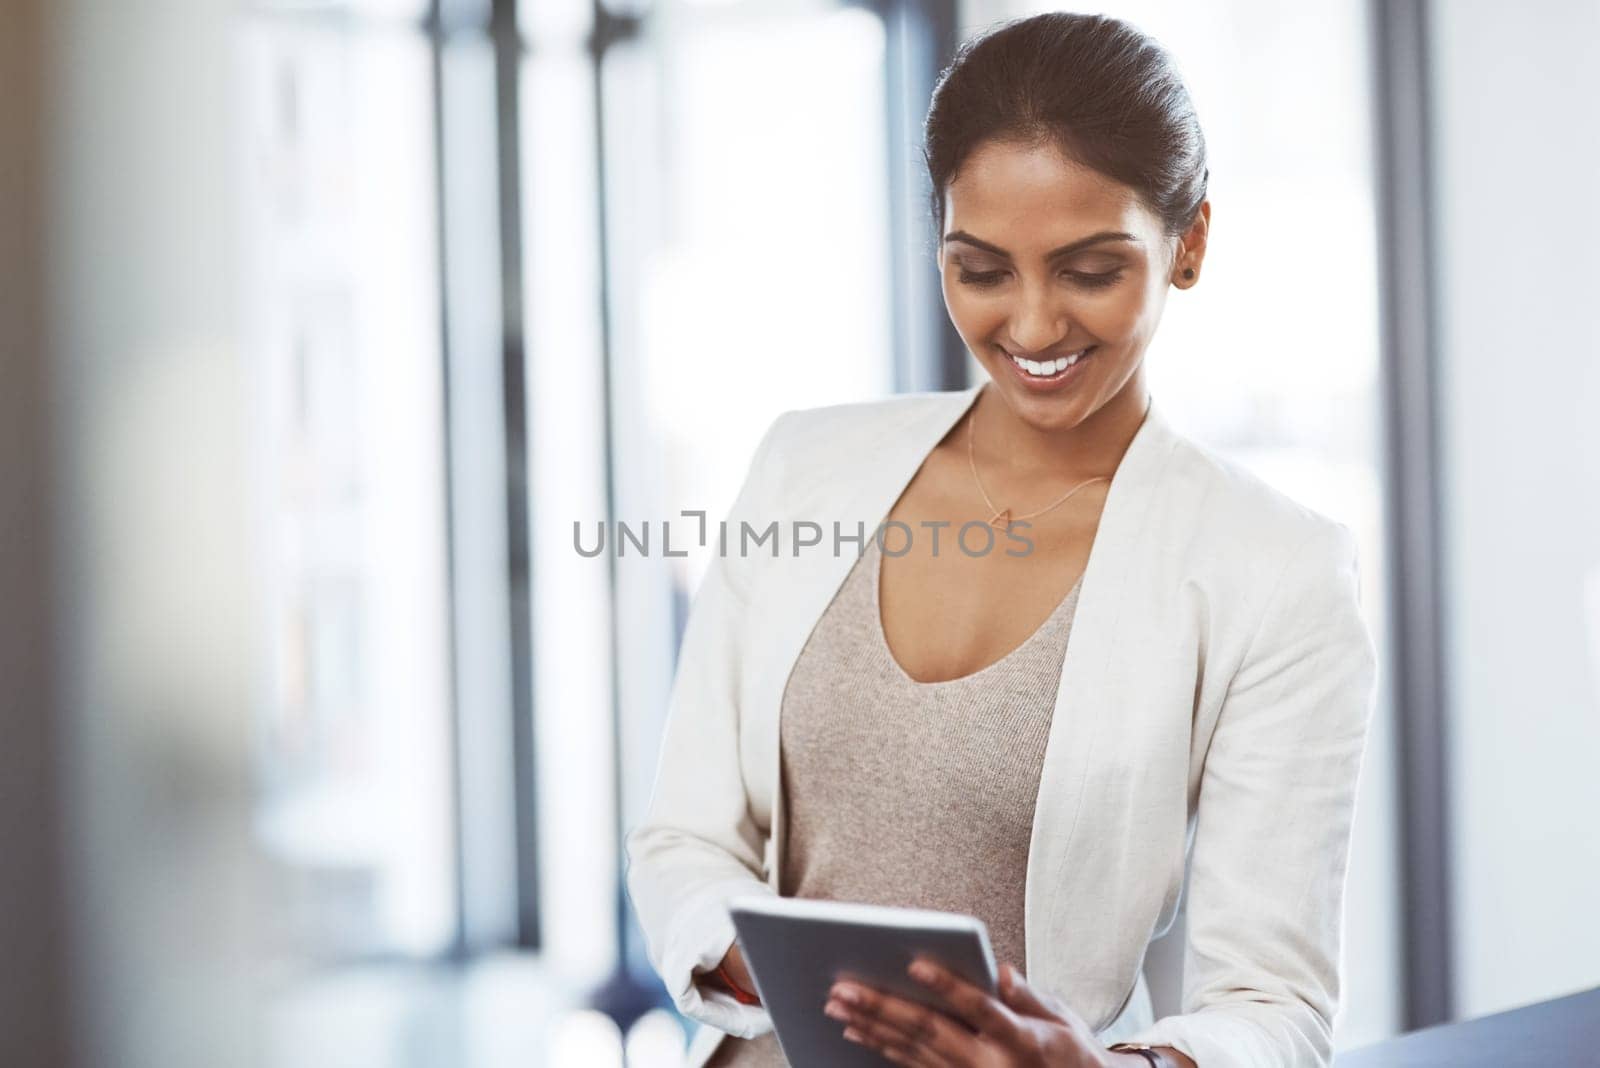 Smart professionals use smart technology. a young businesswoman using a digital tablet at work